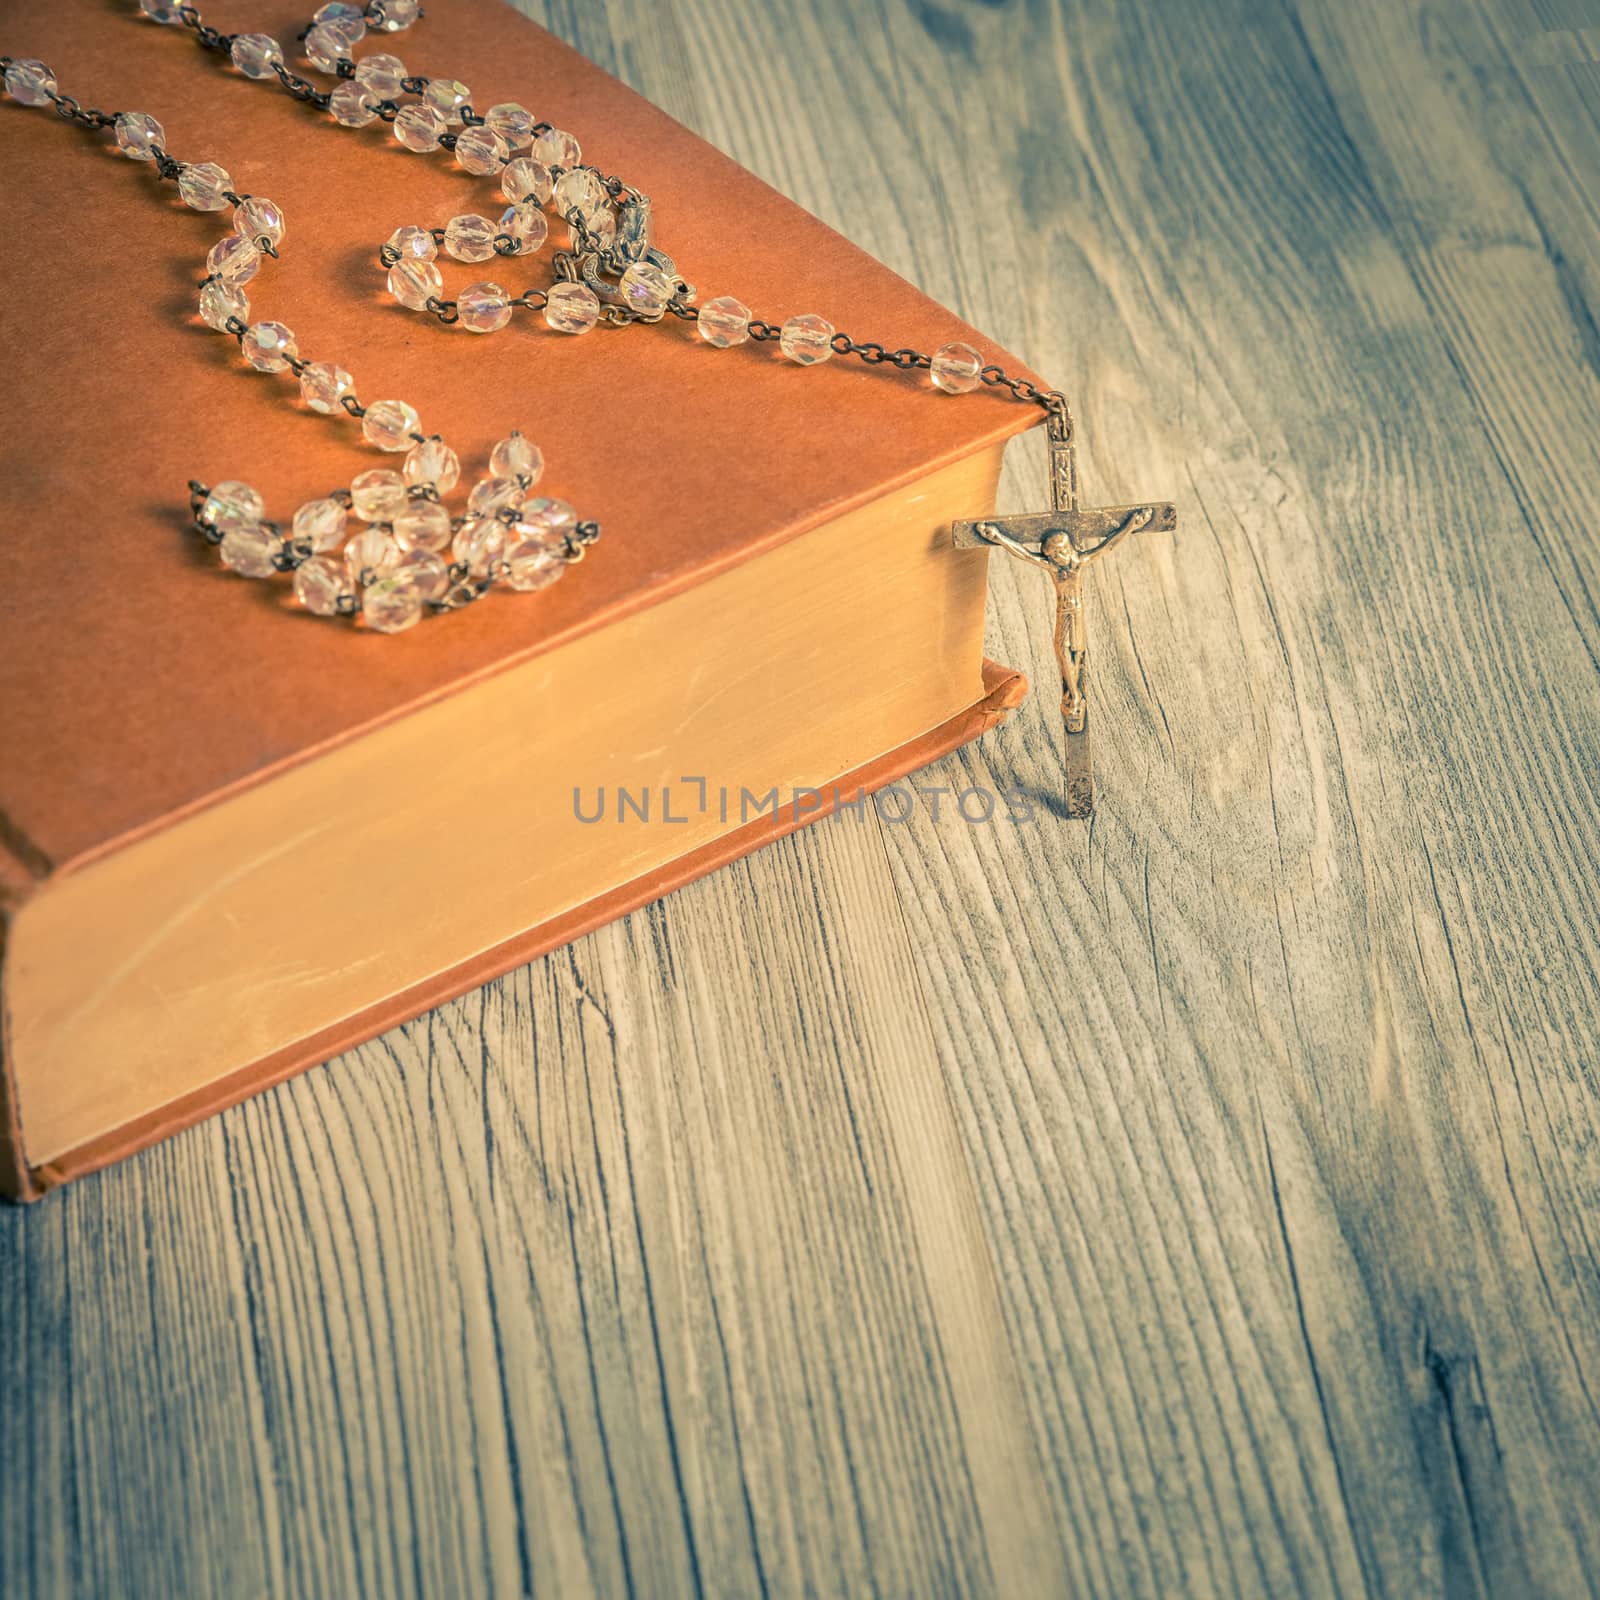 Vintage rosary on book by Robertobinetti70